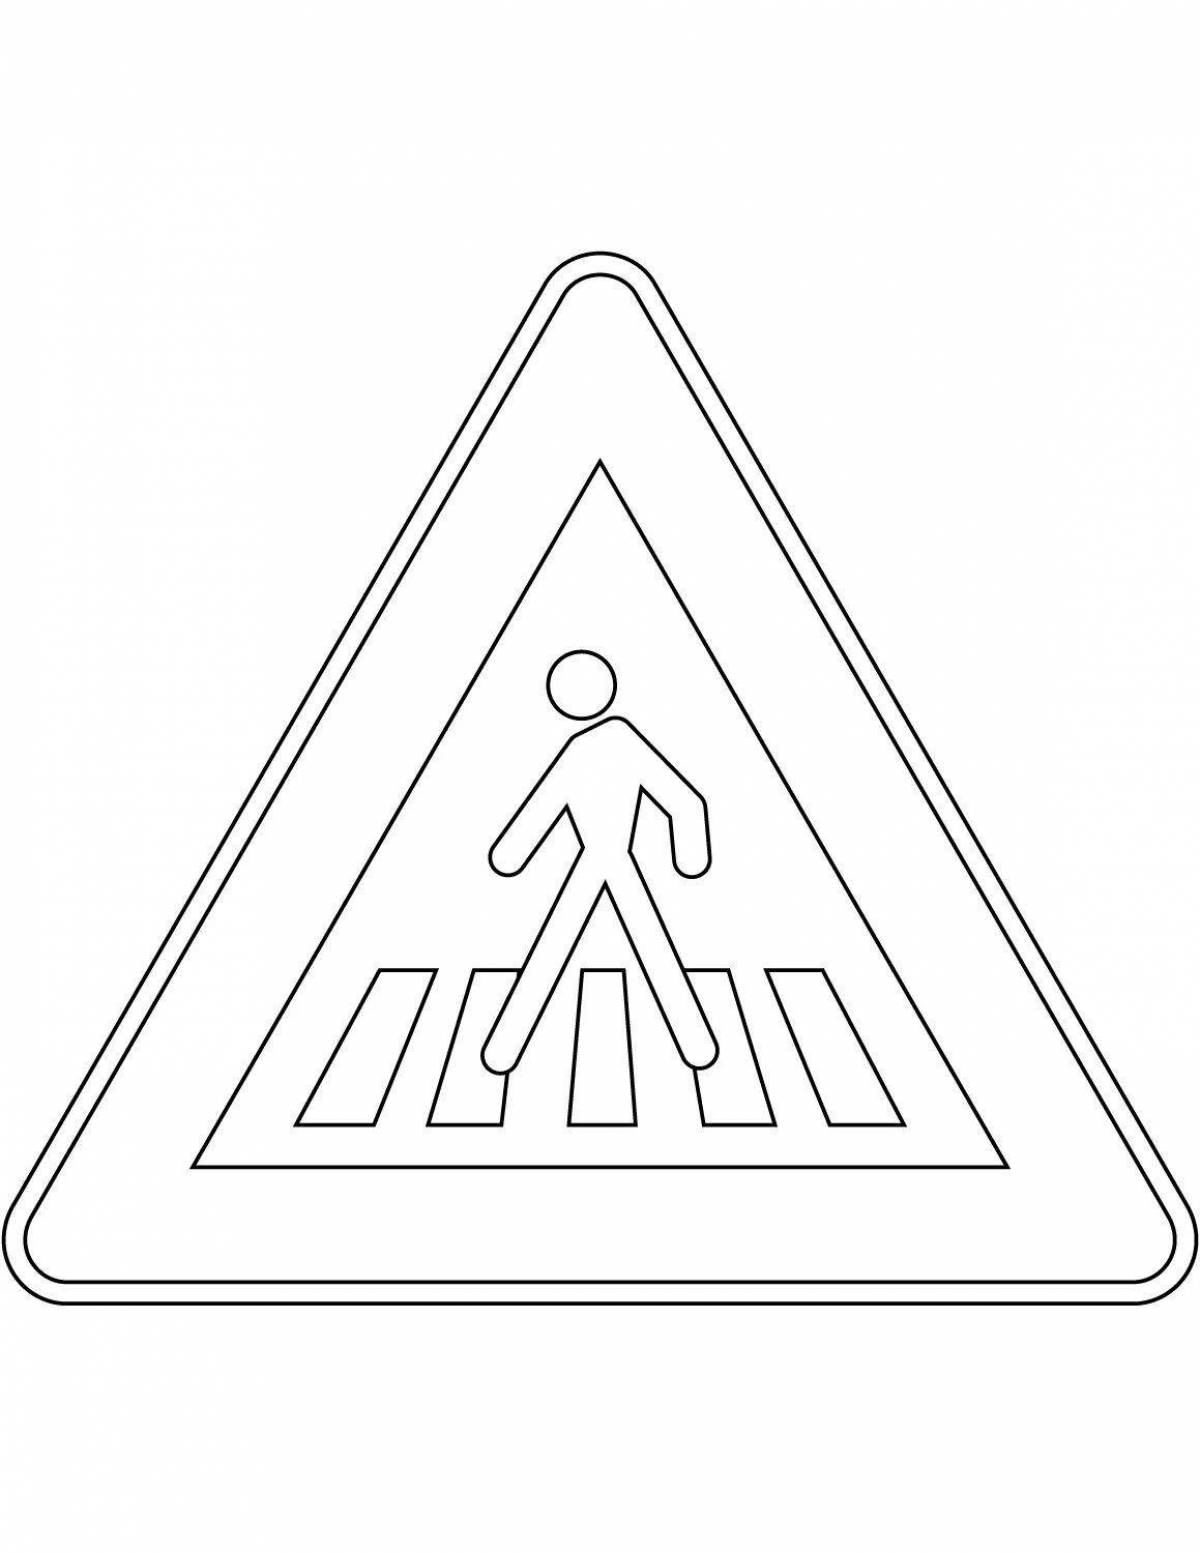 Conspicuously shiny traffic sign for pedestrians